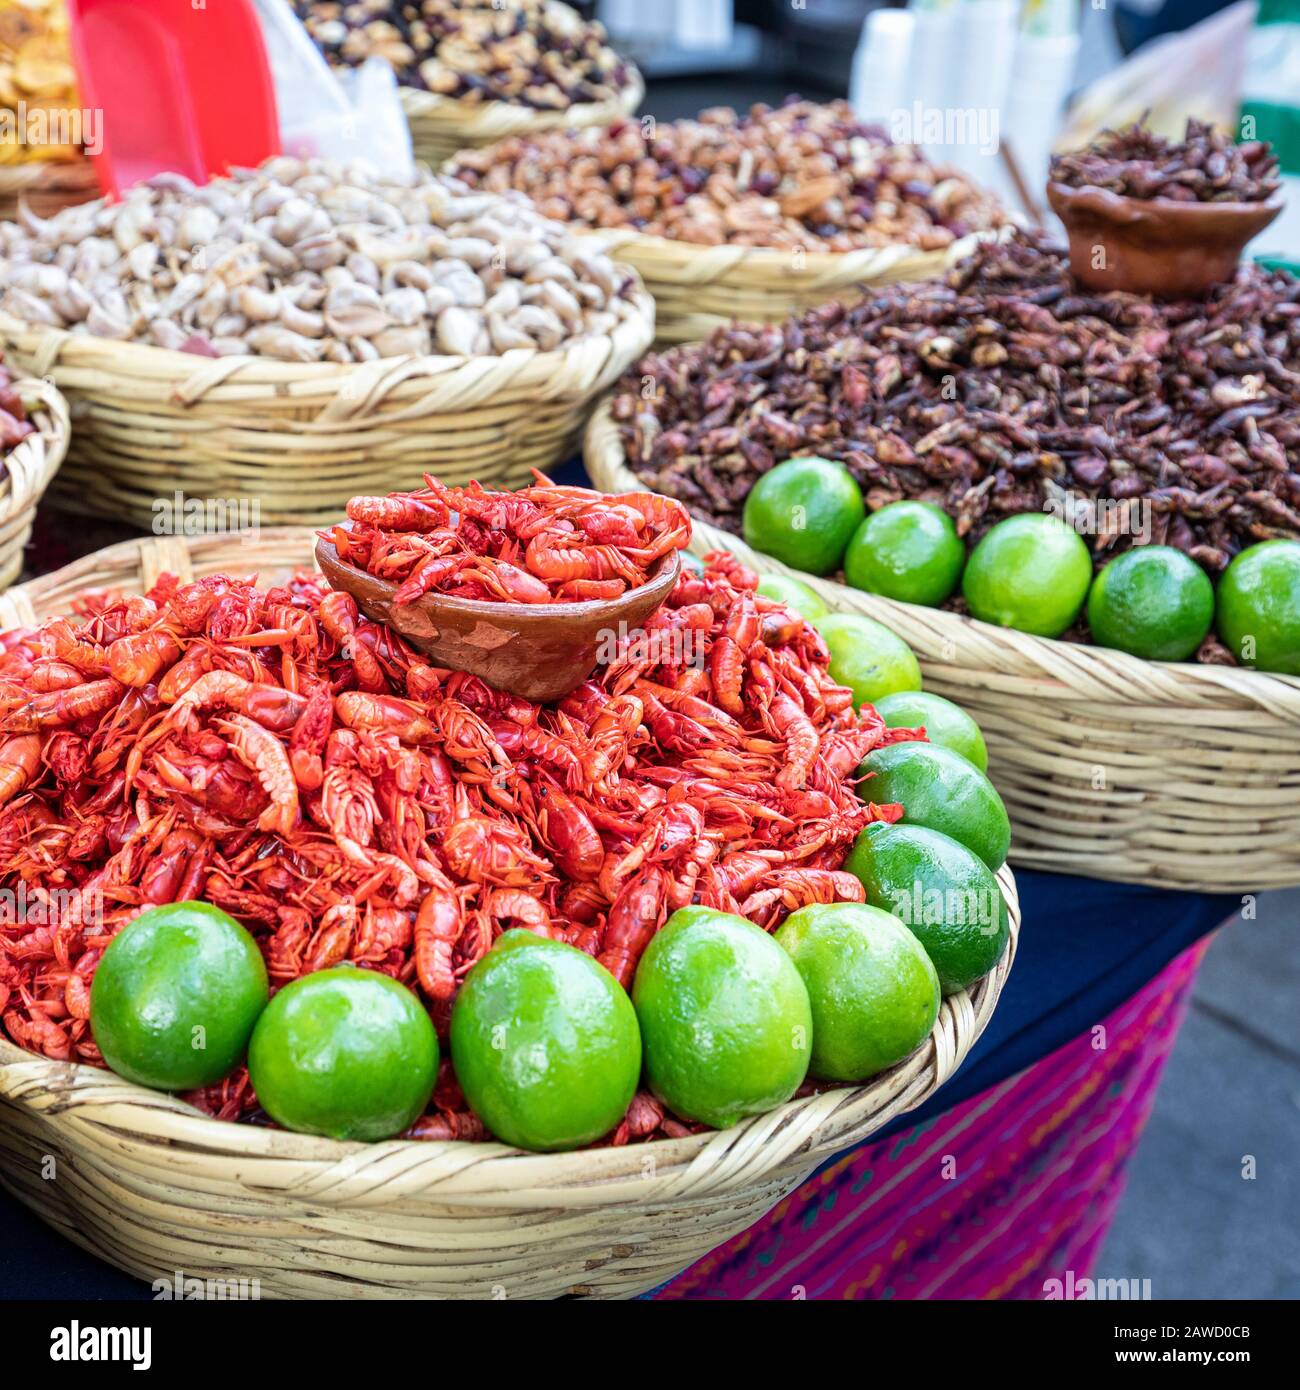 Small shrimp and fried insects on sale in a Mexico City open market, Mexico. Stock Photo